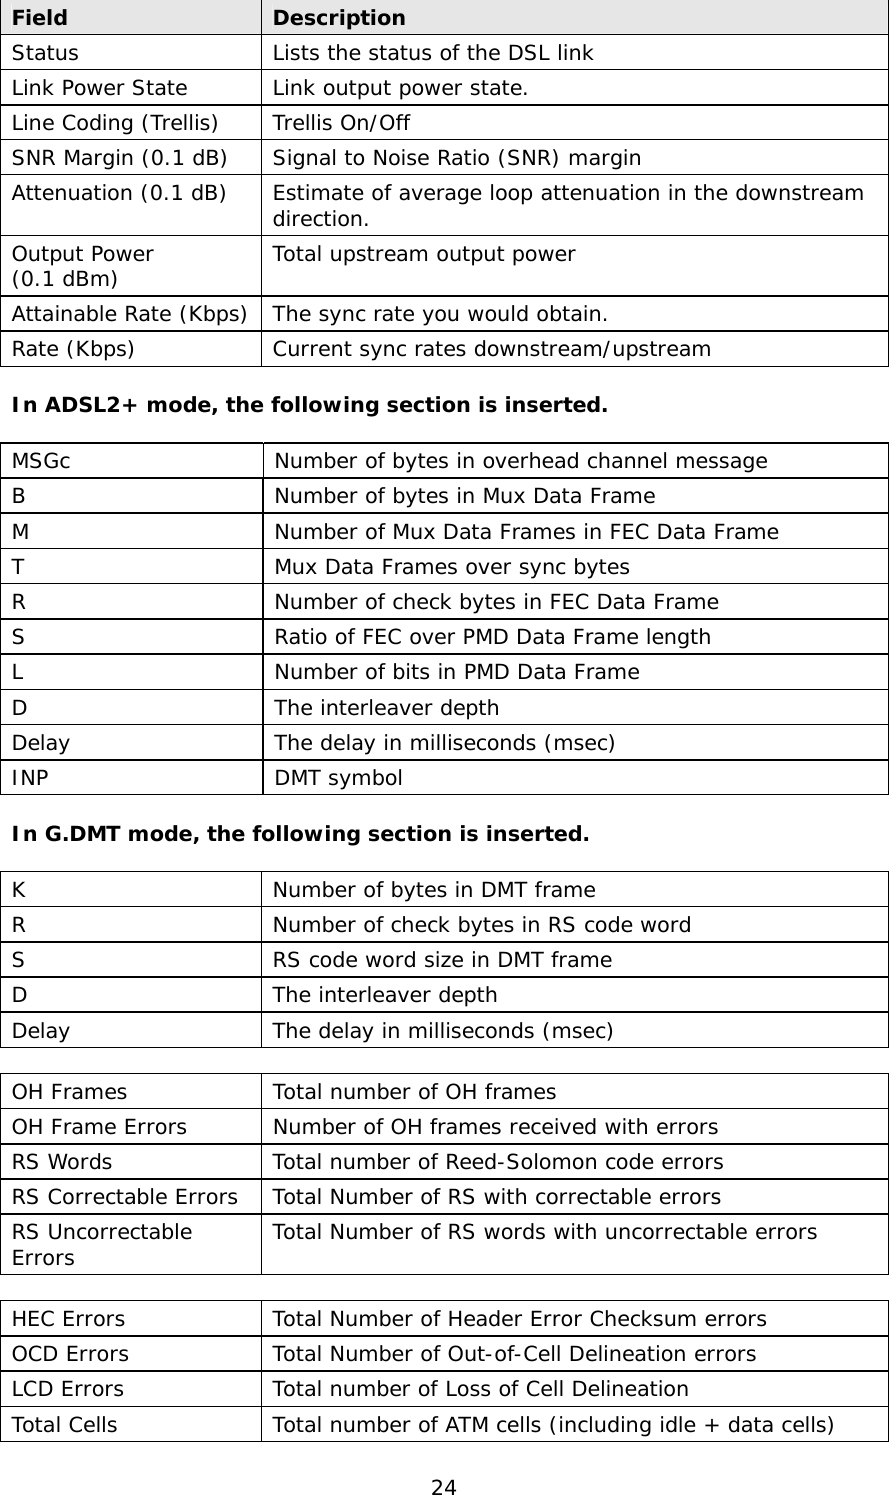  24 Field  Description Status  Lists the status of the DSL link Link Power State  Link output power state. Line Coding (Trellis)  Trellis On/Off SNR Margin (0.1 dB)  Signal to Noise Ratio (SNR) margin Attenuation (0.1 dB)  Estimate of average loop attenuation in the downstream direction. Output Power  (0.1 dBm)  Total upstream output power Attainable Rate (Kbps)  The sync rate you would obtain. Rate (Kbps)  Current sync rates downstream/upstream   In ADSL2+ mode, the following section is inserted.  MSGc  Number of bytes in overhead channel message B  Number of bytes in Mux Data Frame M  Number of Mux Data Frames in FEC Data Frame T   Mux Data Frames over sync bytes R   Number of check bytes in FEC Data Frame S   Ratio of FEC over PMD Data Frame length L   Number of bits in PMD Data Frame D   The interleaver depth Delay   The delay in milliseconds (msec) INP DMT symbol  In G.DMT mode, the following section is inserted.  K  Number of bytes in DMT frame R  Number of check bytes in RS code word S  RS code word size in DMT frame D  The interleaver depth Delay  The delay in milliseconds (msec)  OH Frames  Total number of OH frames OH Frame Errors  Number of OH frames received with errors RS Words  Total number of Reed-Solomon code errors RS Correctable Errors  Total Number of RS with correctable errors RS Uncorrectable Errors   Total Number of RS words with uncorrectable errors  HEC Errors  Total Number of Header Error Checksum errors OCD Errors  Total Number of Out-of-Cell Delineation errors LCD Errors  Total number of Loss of Cell Delineation Total Cells  Total number of ATM cells (including idle + data cells) 